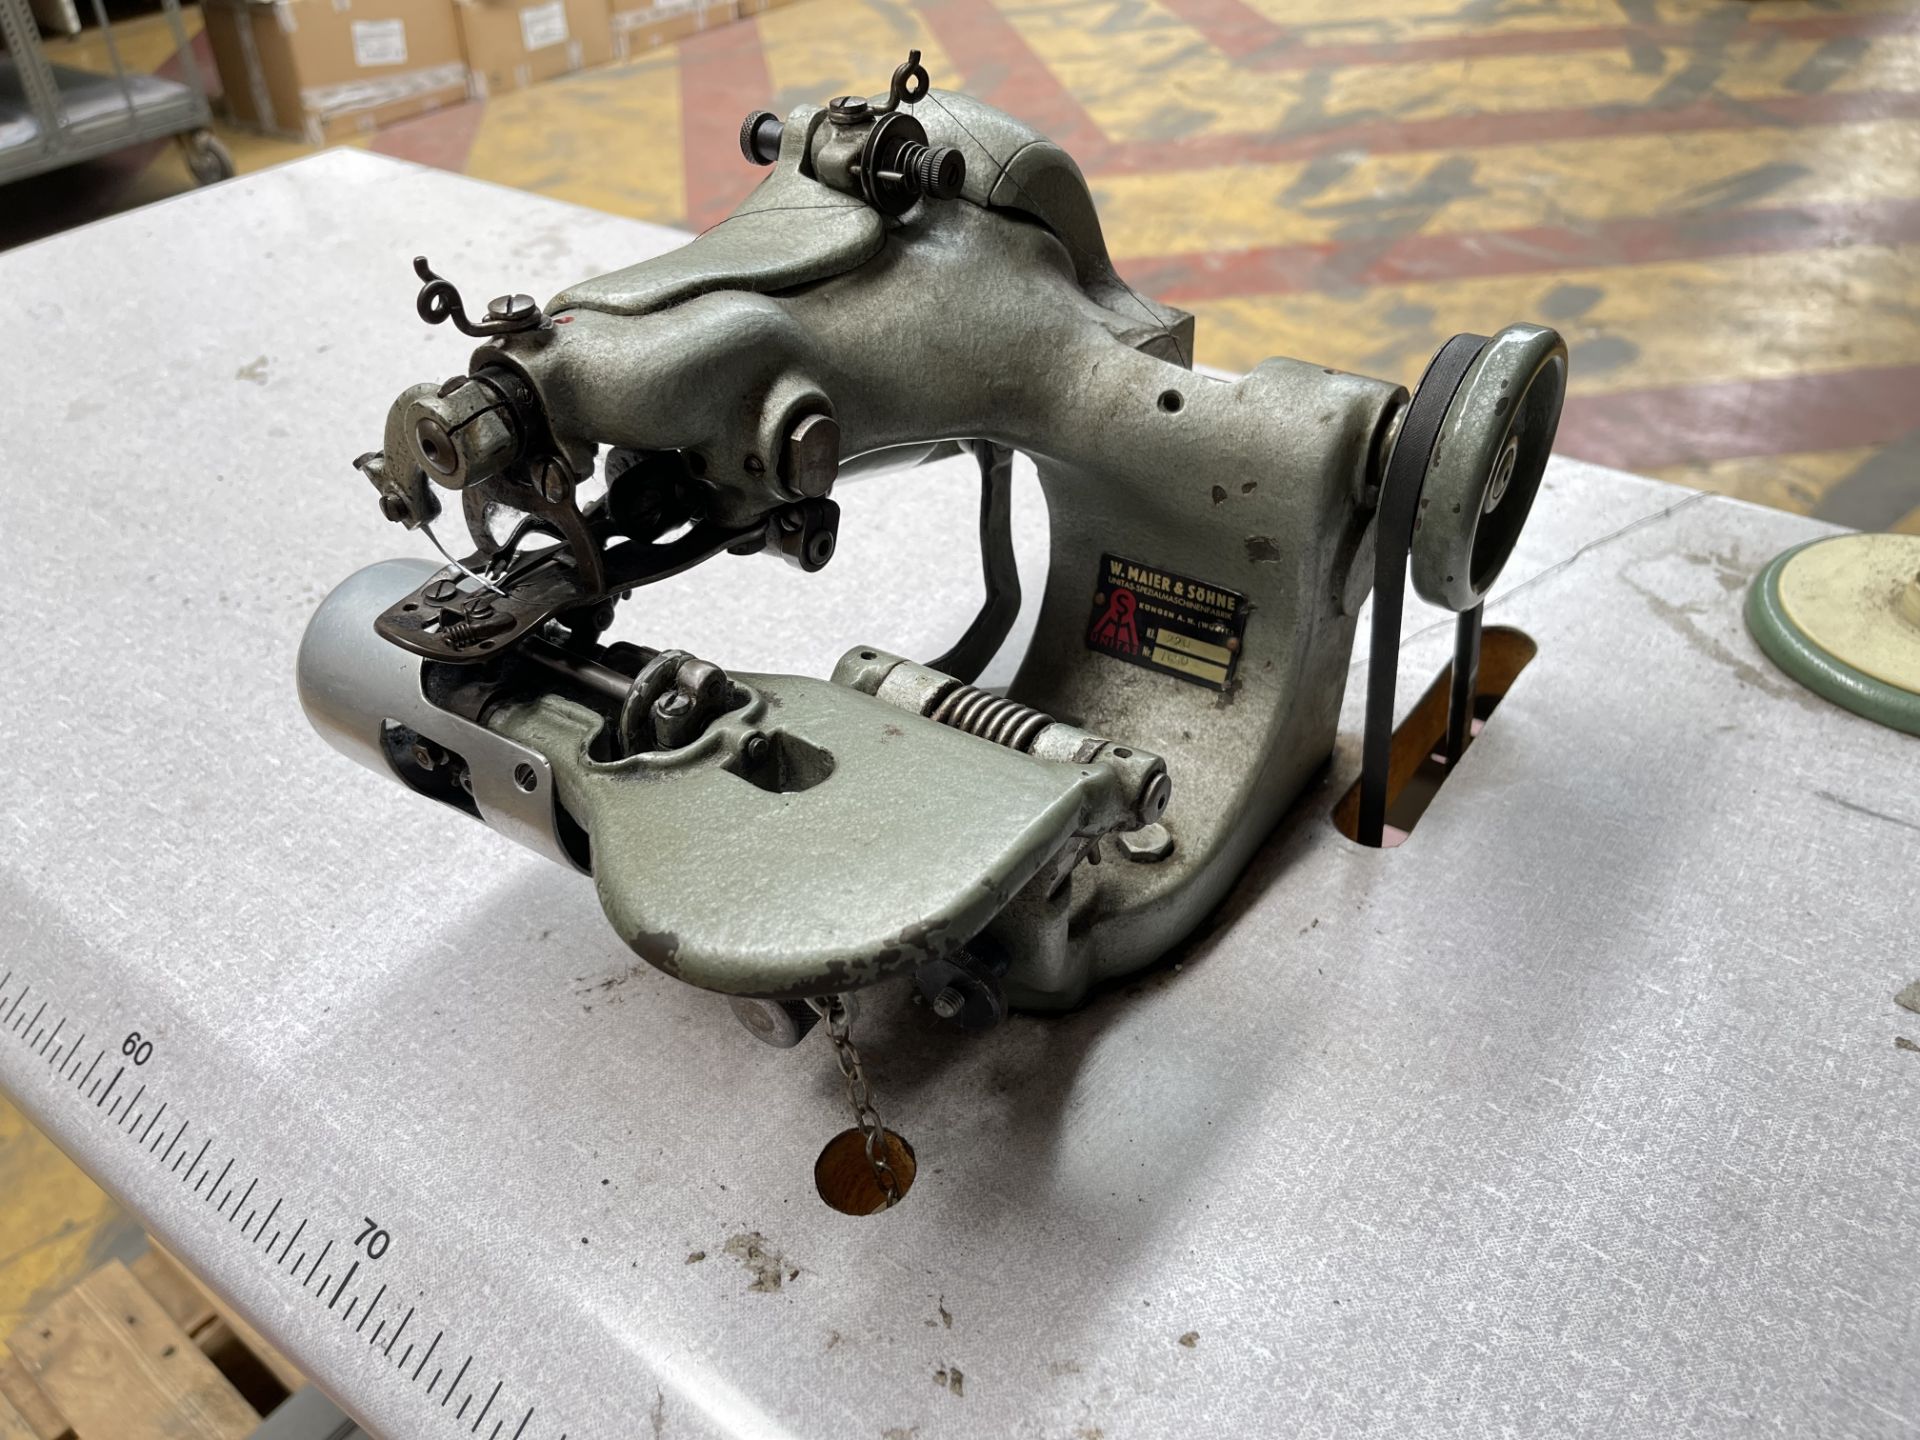 Maier & Sohne 220 Sewing machine. S/No 1650 - Image 3 of 7